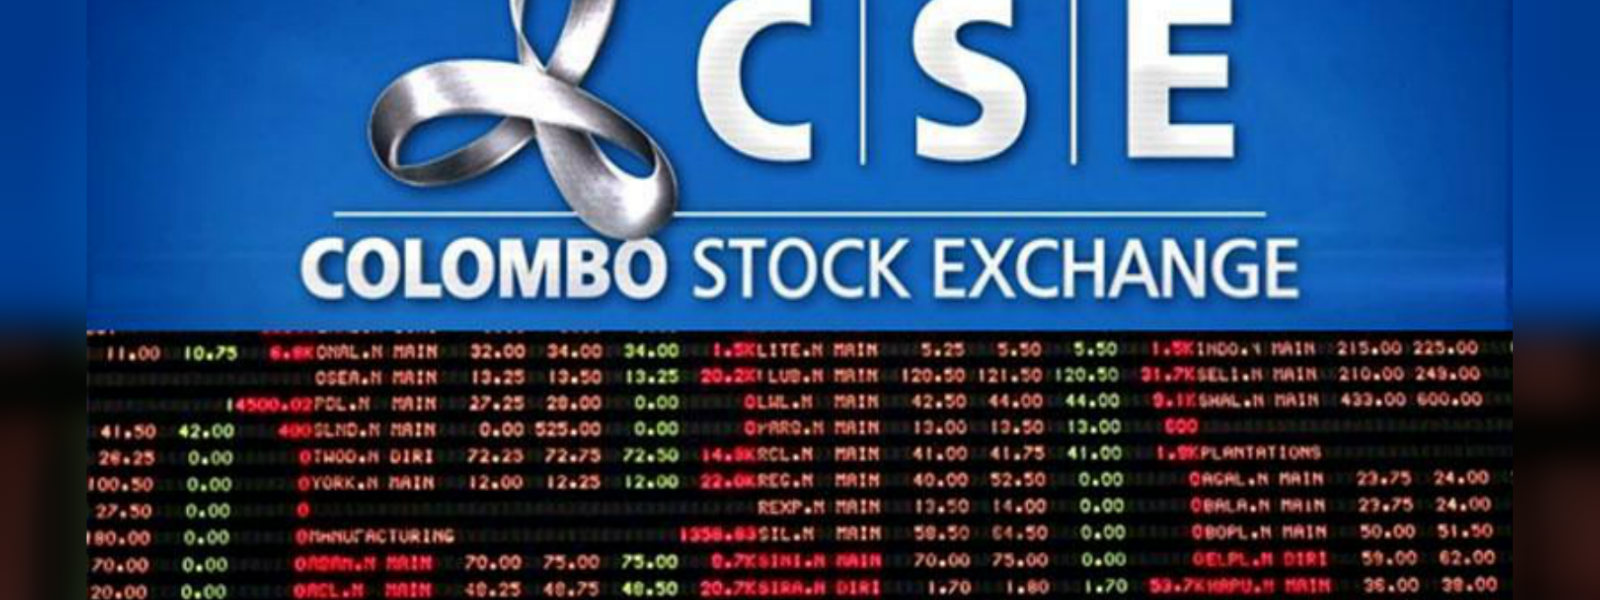 Trading at the Colombo Stock Exchange halted